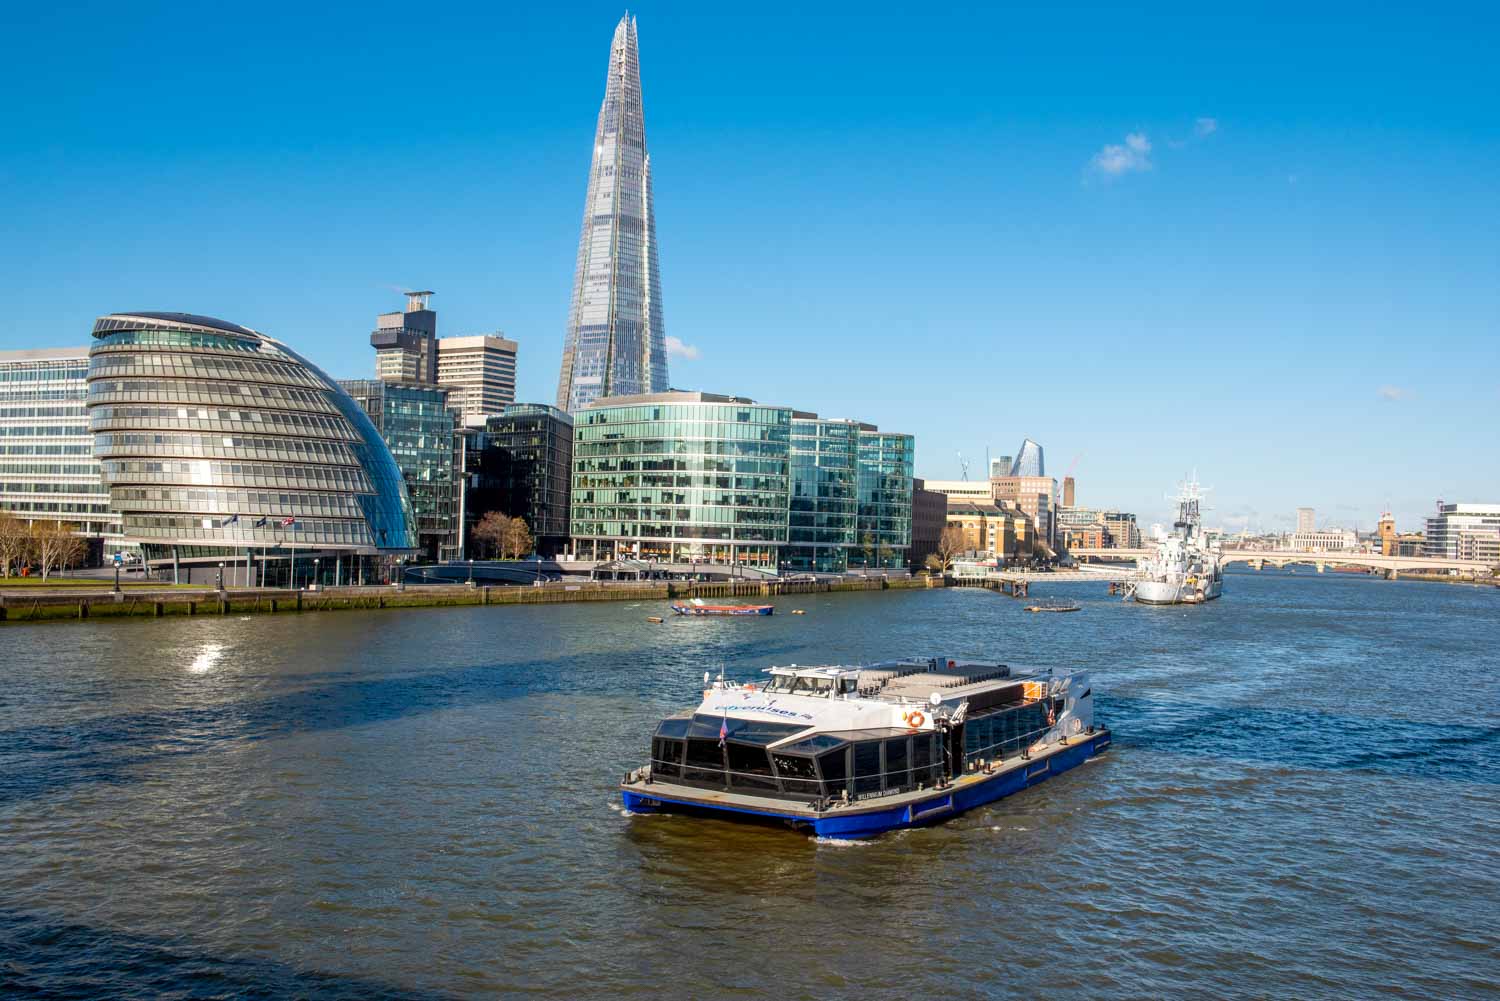 One of the City Cruises boats on the Thames in London with the Shard and HMS Belfast in the background - one of the best boat trips in London with kids